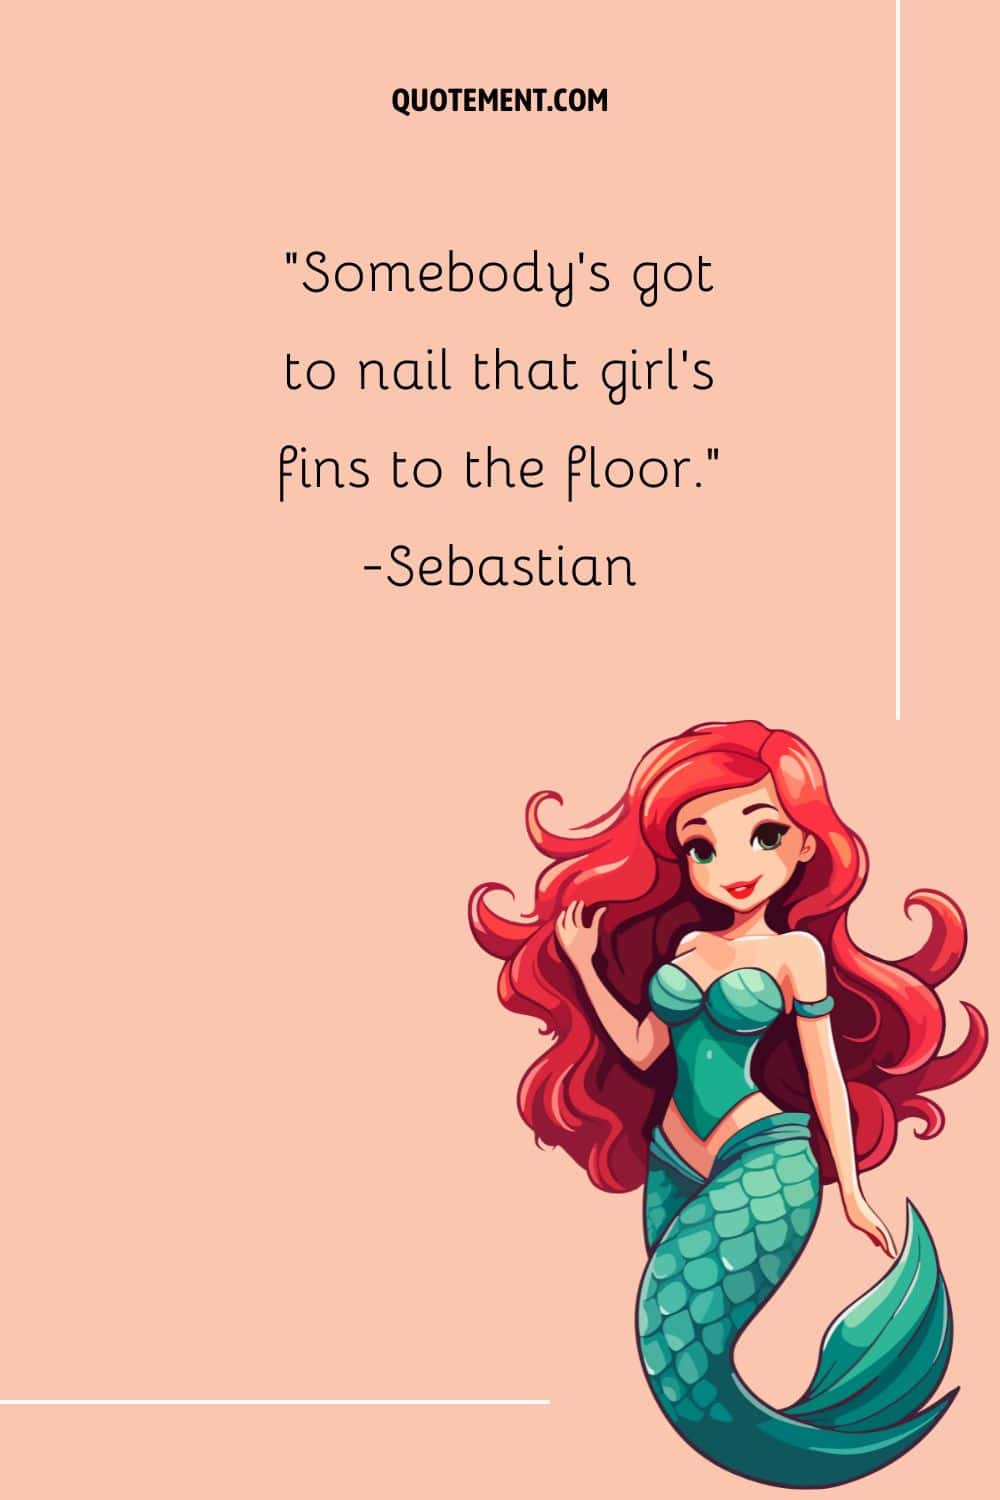 Ariel illustration representing one of the best Little Mermaid quotes.